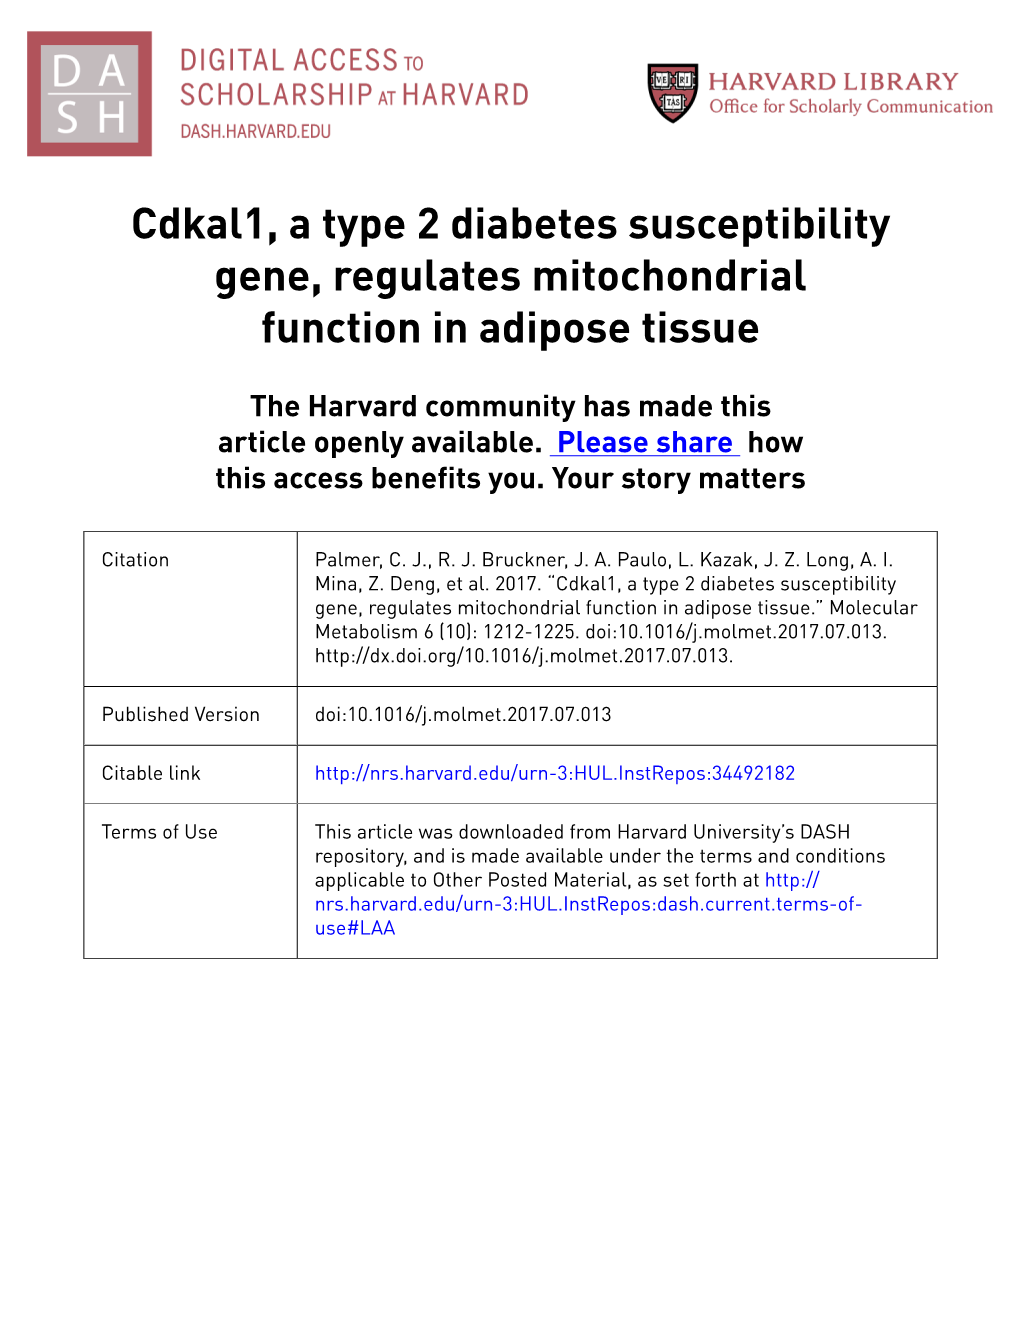 Cdkal1, a Type 2 Diabetes Susceptibility Gene, Regulates Mitochondrial Function in Adipose Tissue